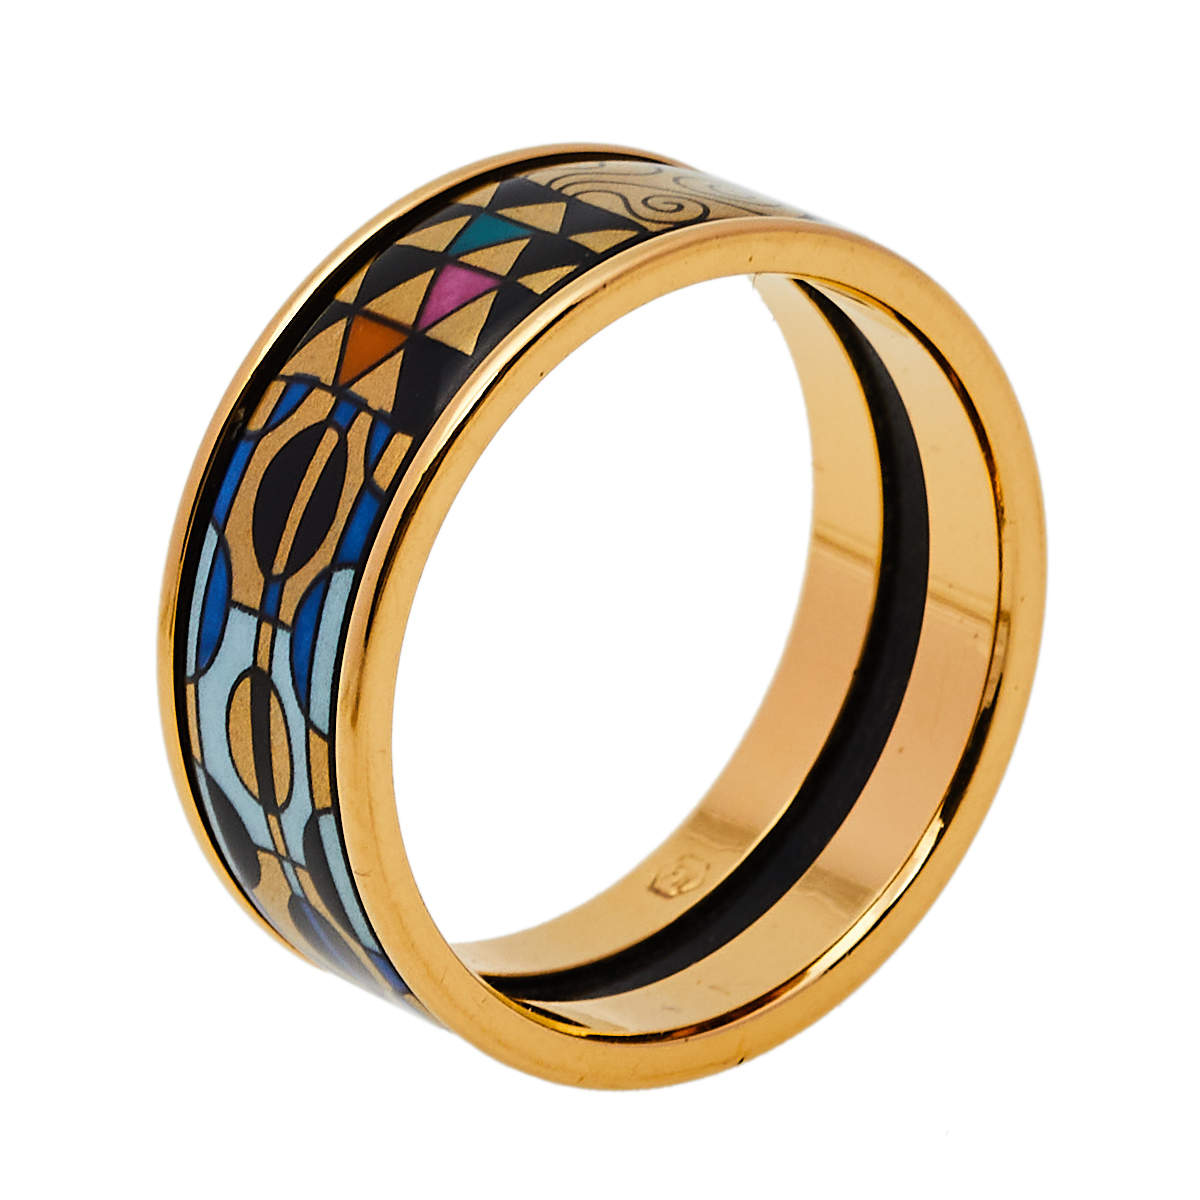 Frey Wille Gold Plated Fire Enamel Band Ring Size EU 55